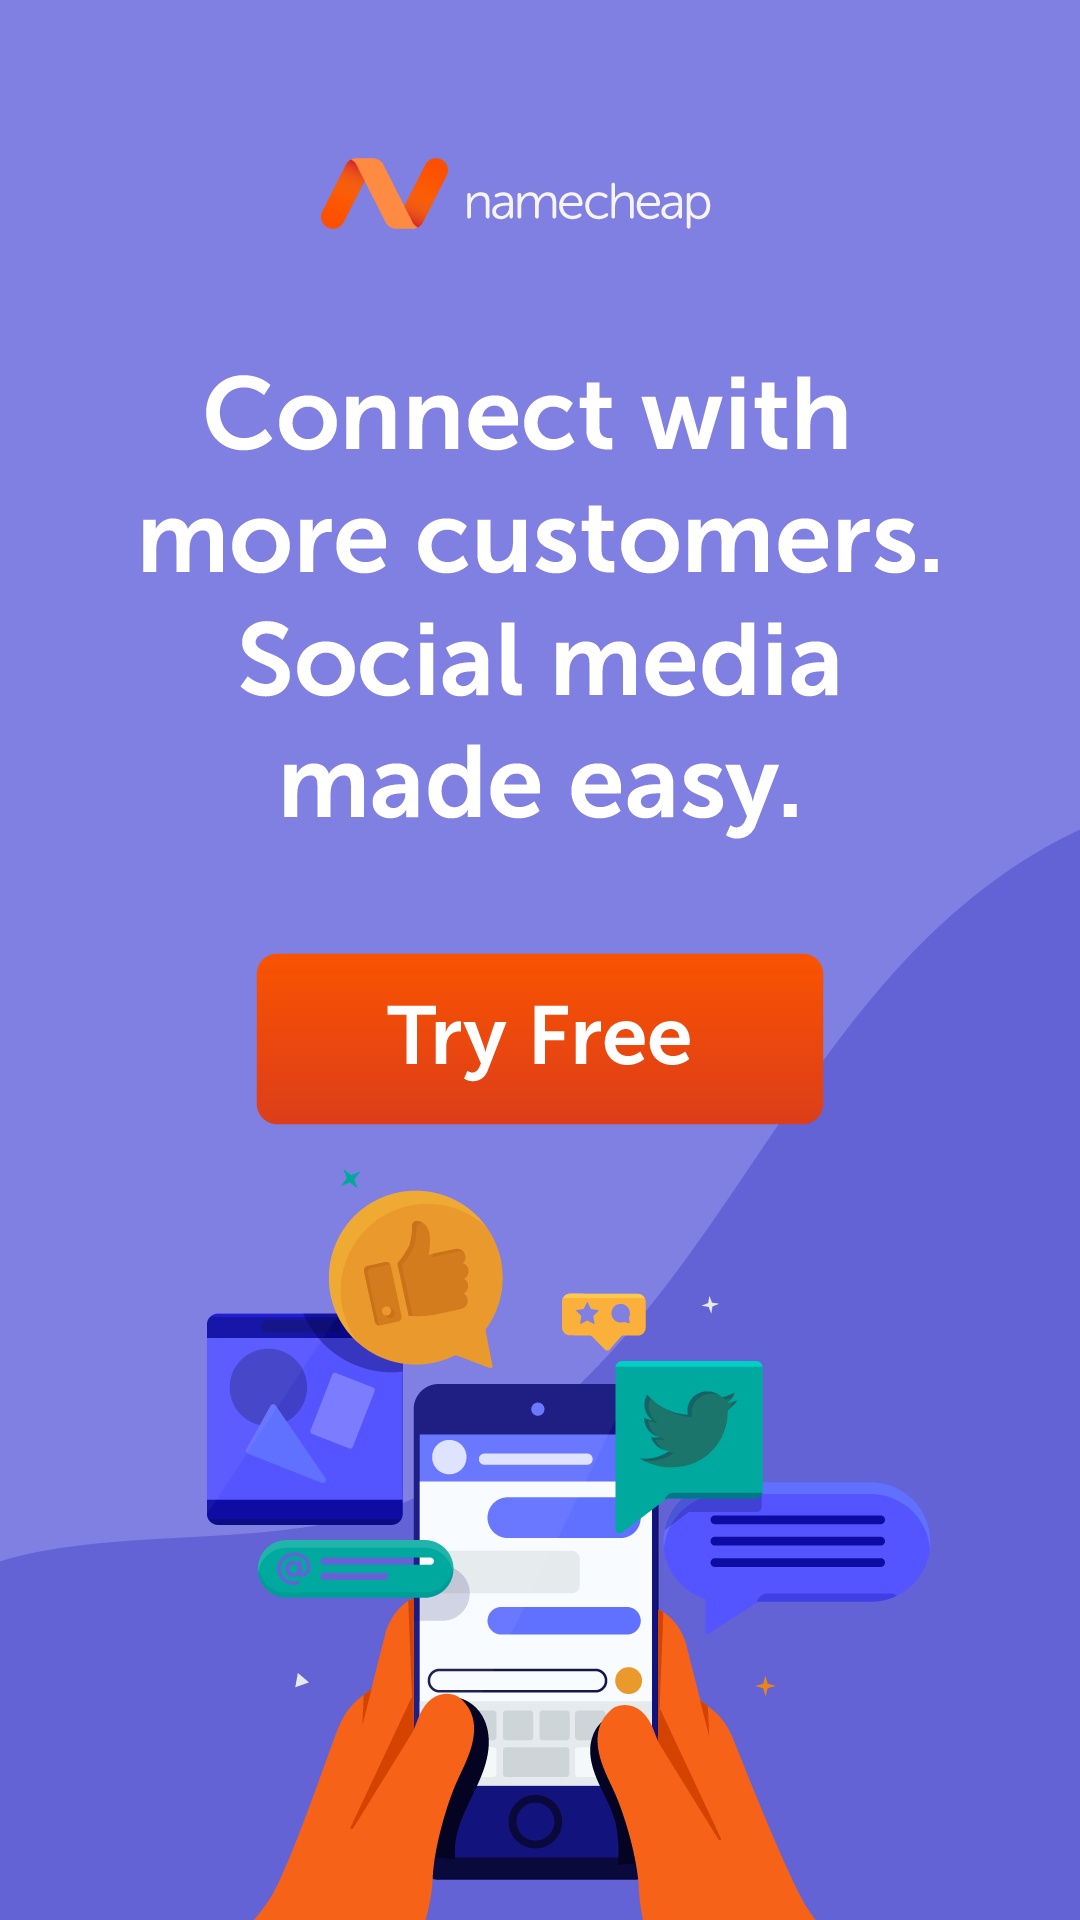 Namecheap, NCsocial-IG, and RelateSocial: A winning combination for social media marketing